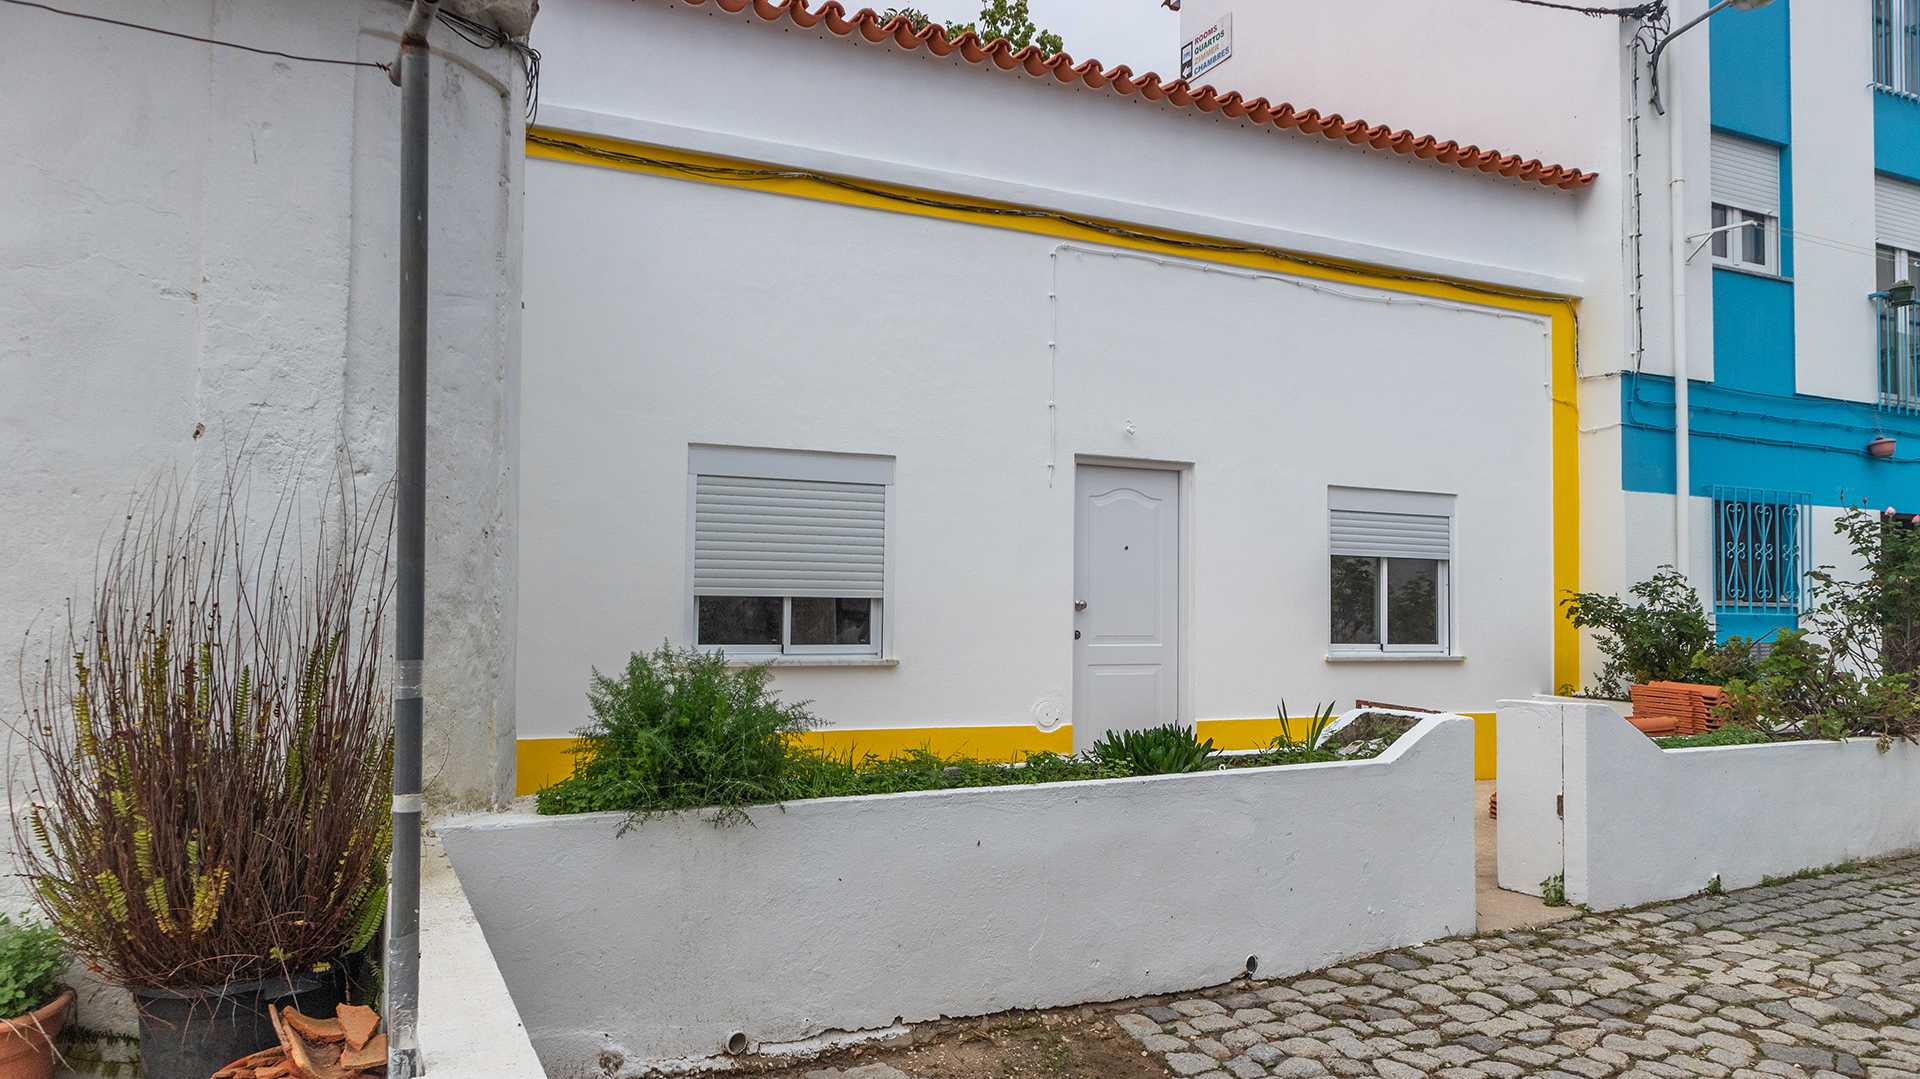 Renovation project - 2 bedroom terraced house near the centre of Monchique | LG2018 One of only three terraced houses in a quiet spot but very close to the town centre with restaurants, shops, market, municipal swimming pool and all other amenities. 
Probably could be finished for approx. €25.000.
